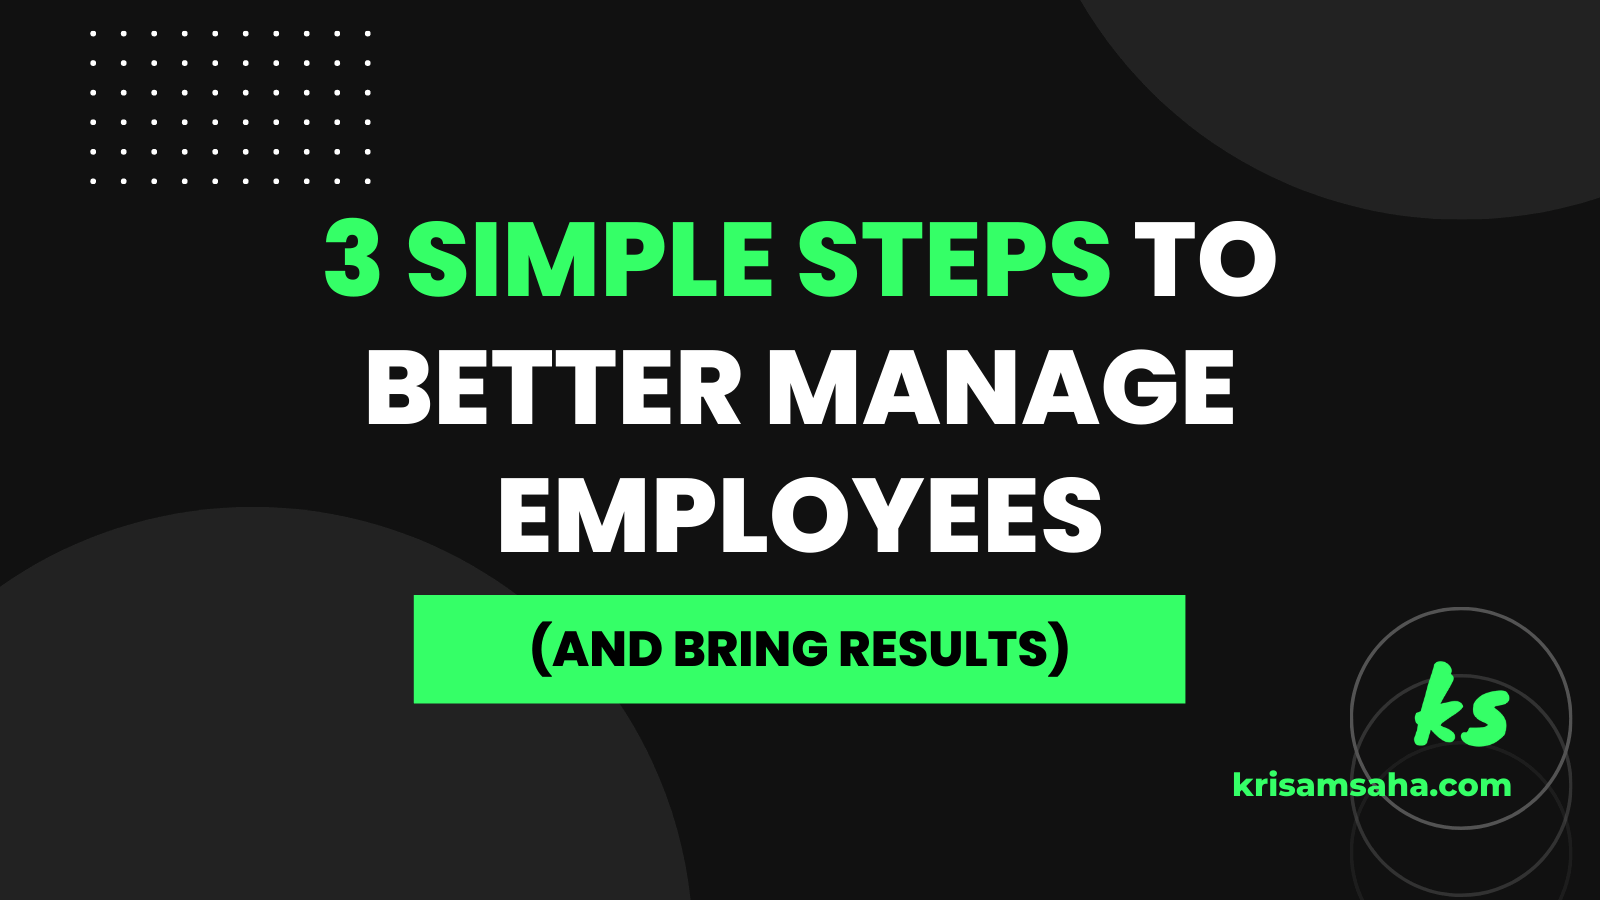 You are currently viewing 3 simple steps to better manage employees (and bring results) at the office